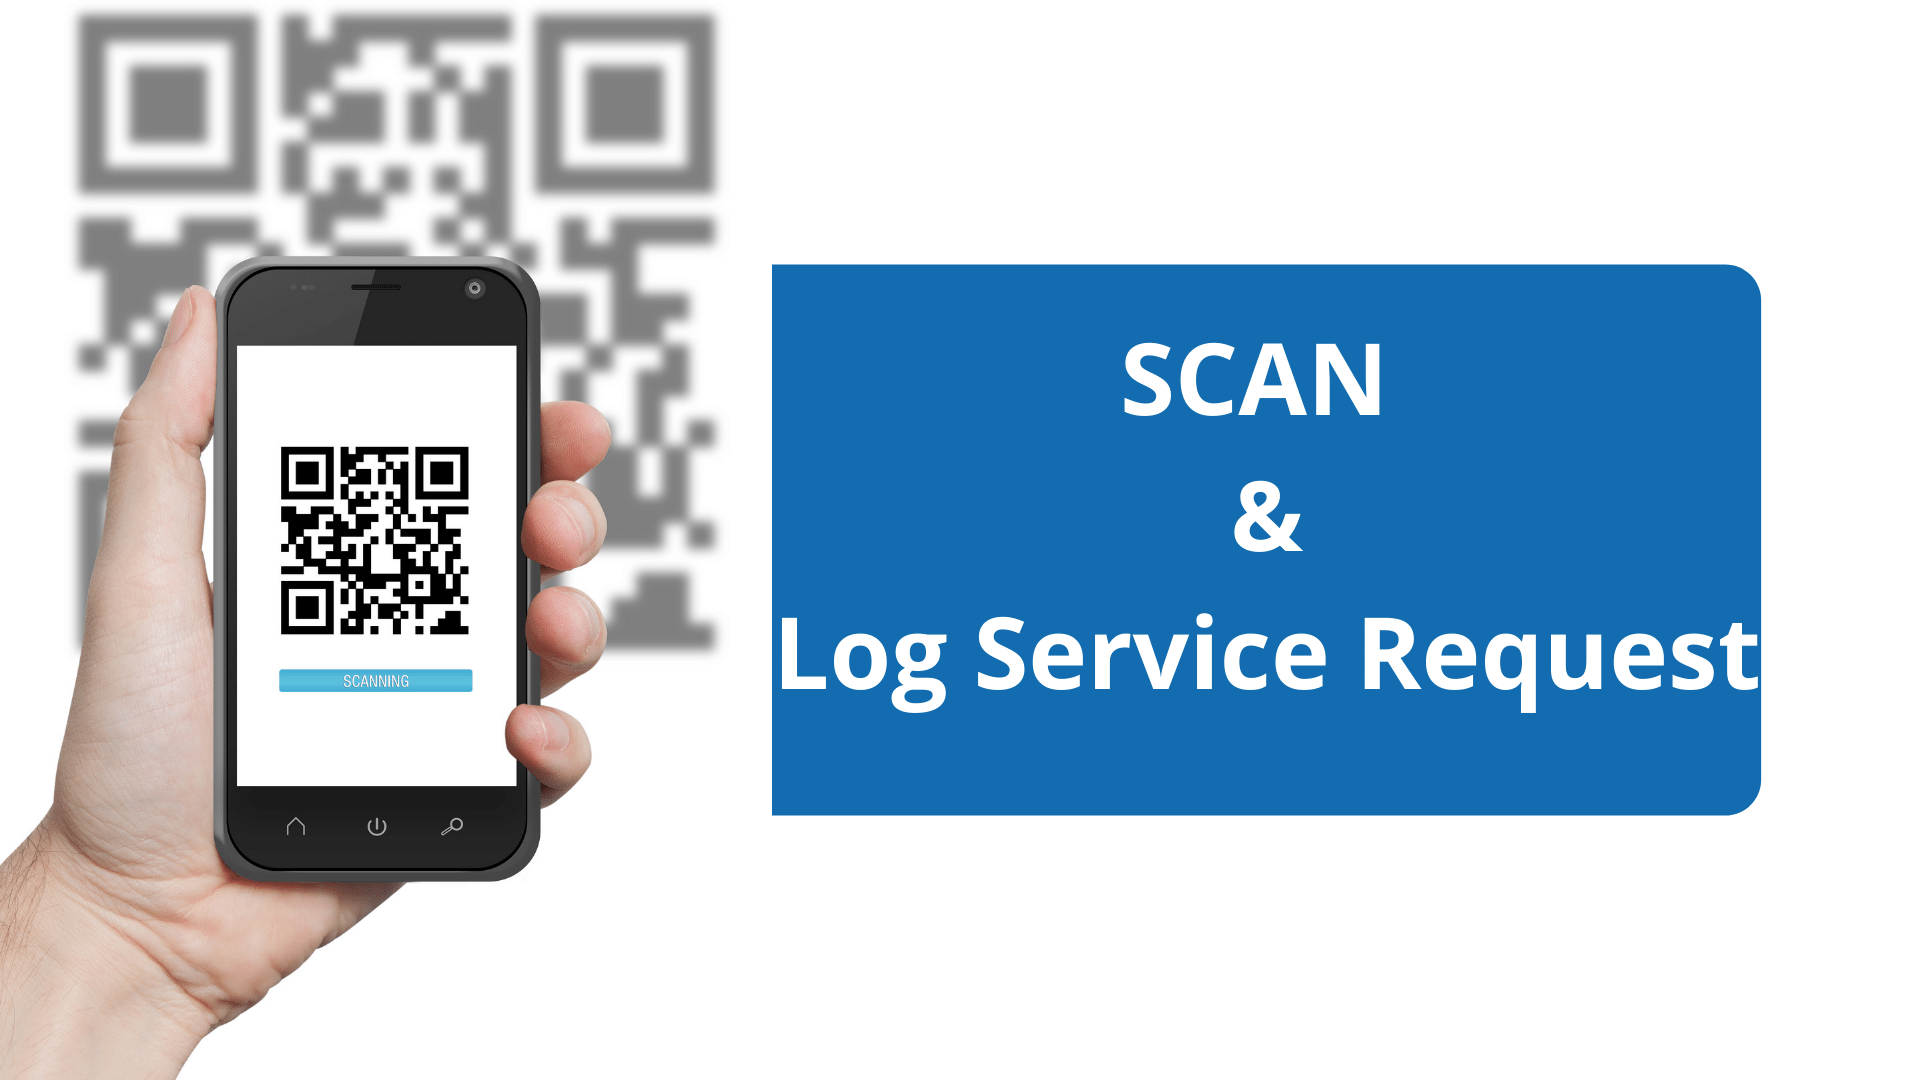 Log complaint by scanning qr code. Reporting a problem become easy and convenient